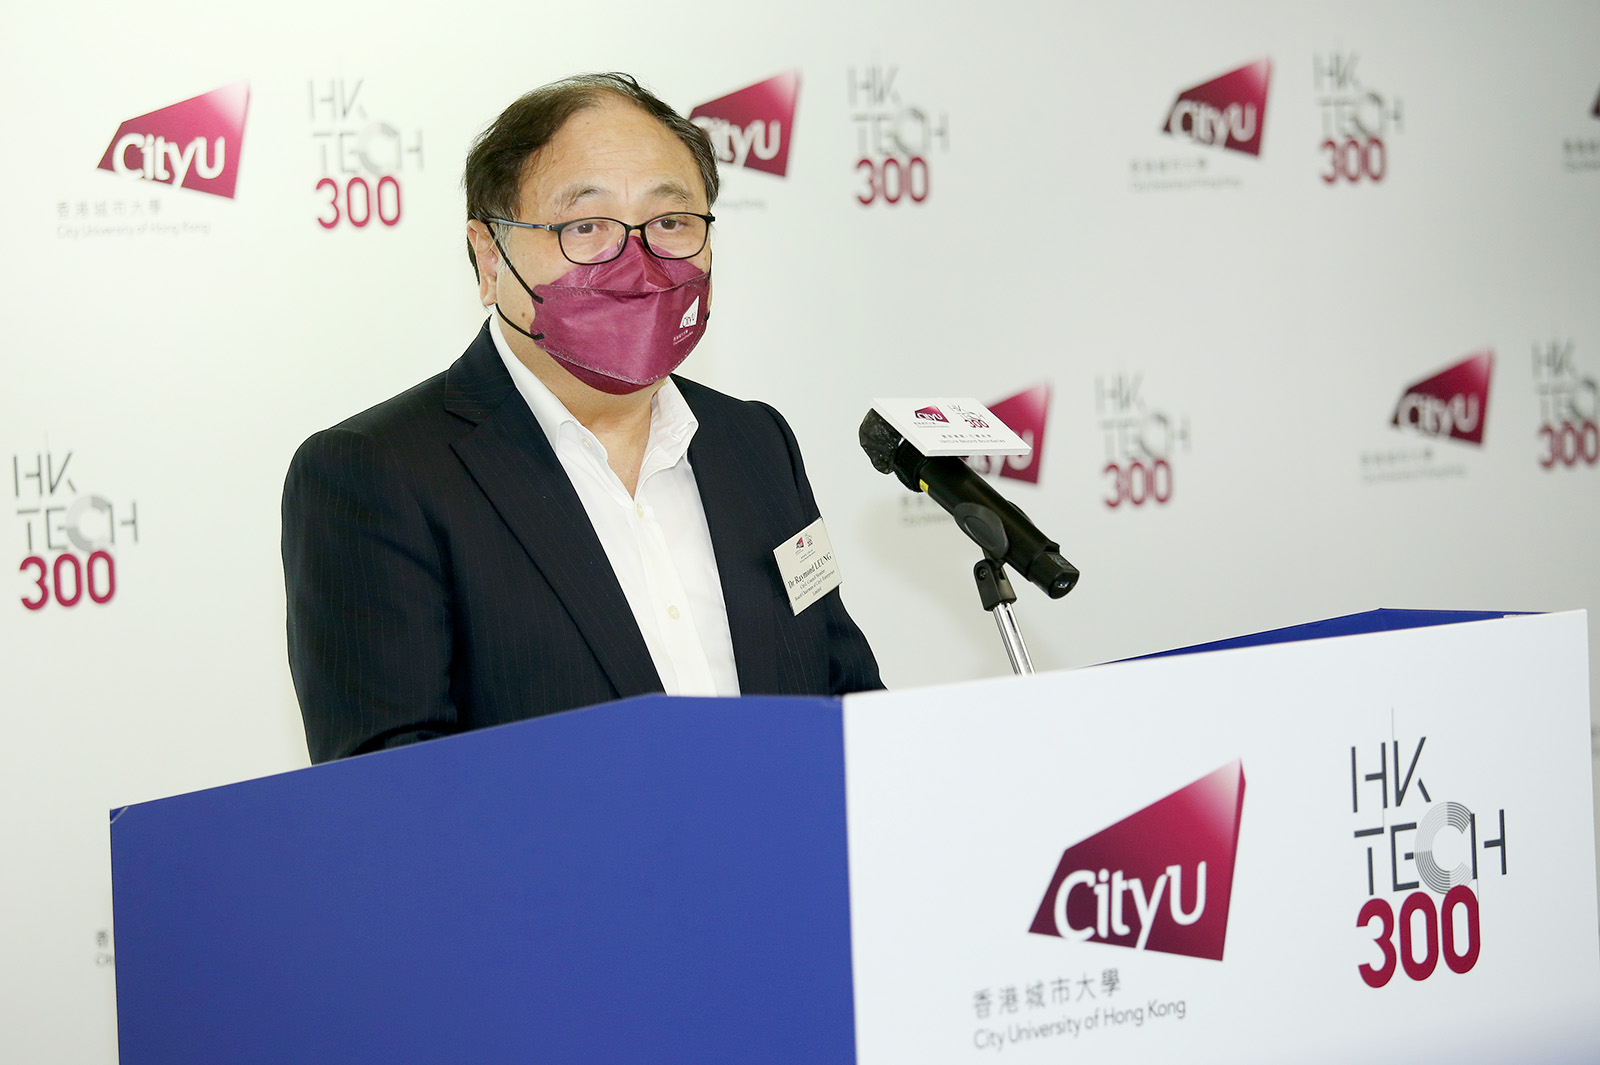 Dr Raymond Leung Siu-hong, CityU Council Member and Board Chairman of CityU Enterprises Limited, gave a speech at the signing ceremony.